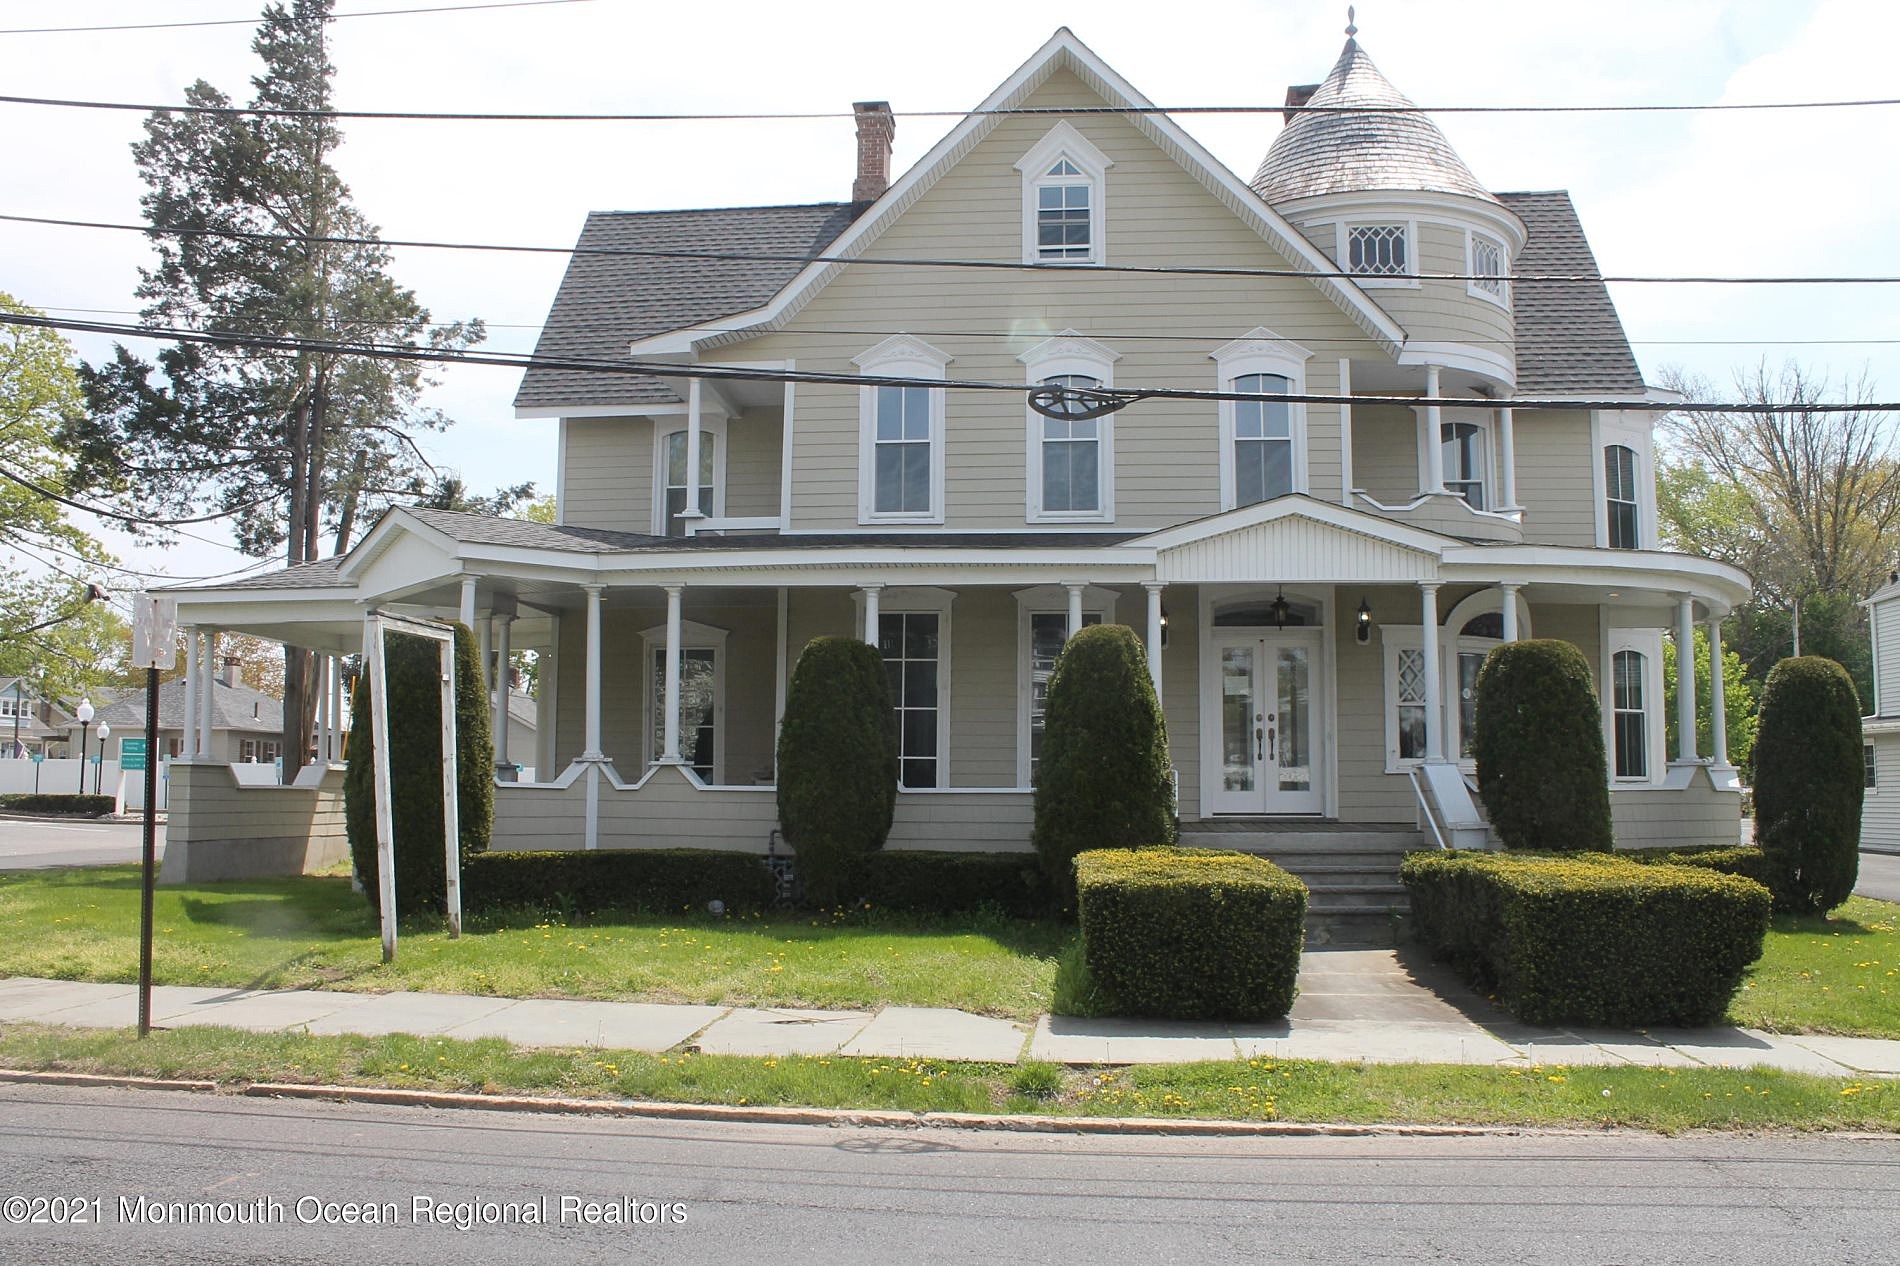 Sabrina the Teenage Witch' house on sale in Freehold, NJ